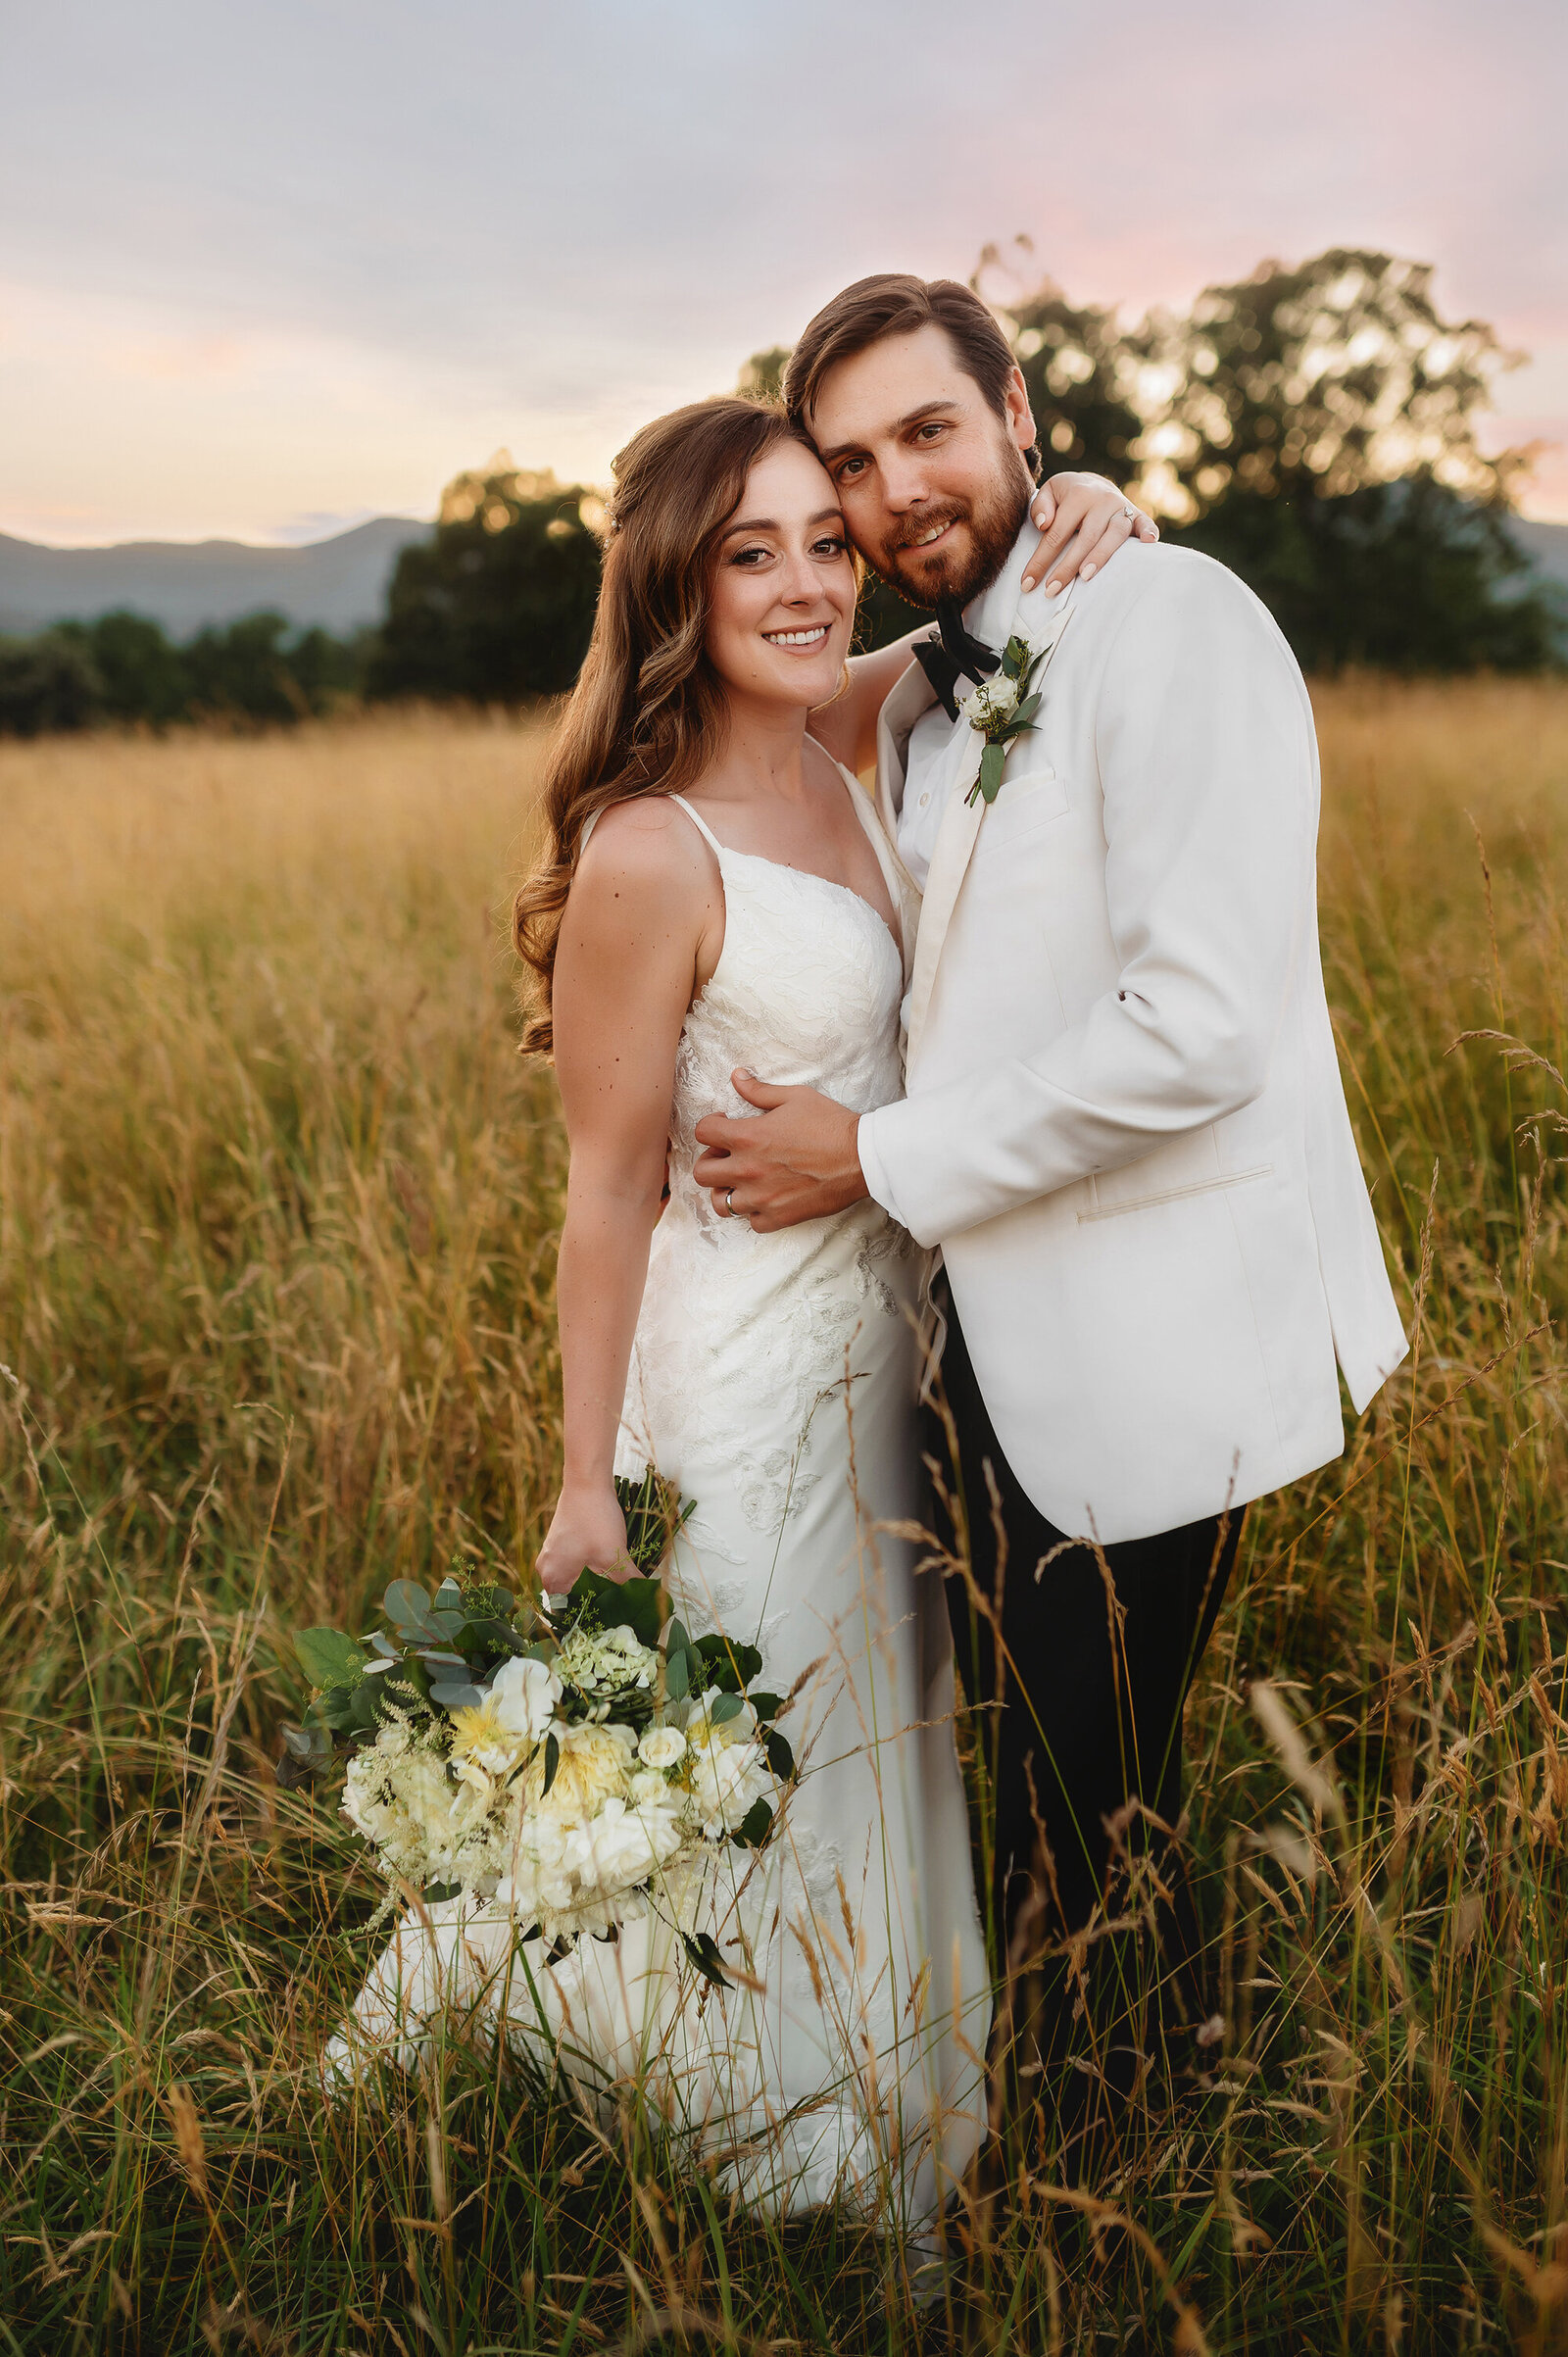 Newlywed Portraits after Micro-Wedding Ceremony in Asheville, NC.